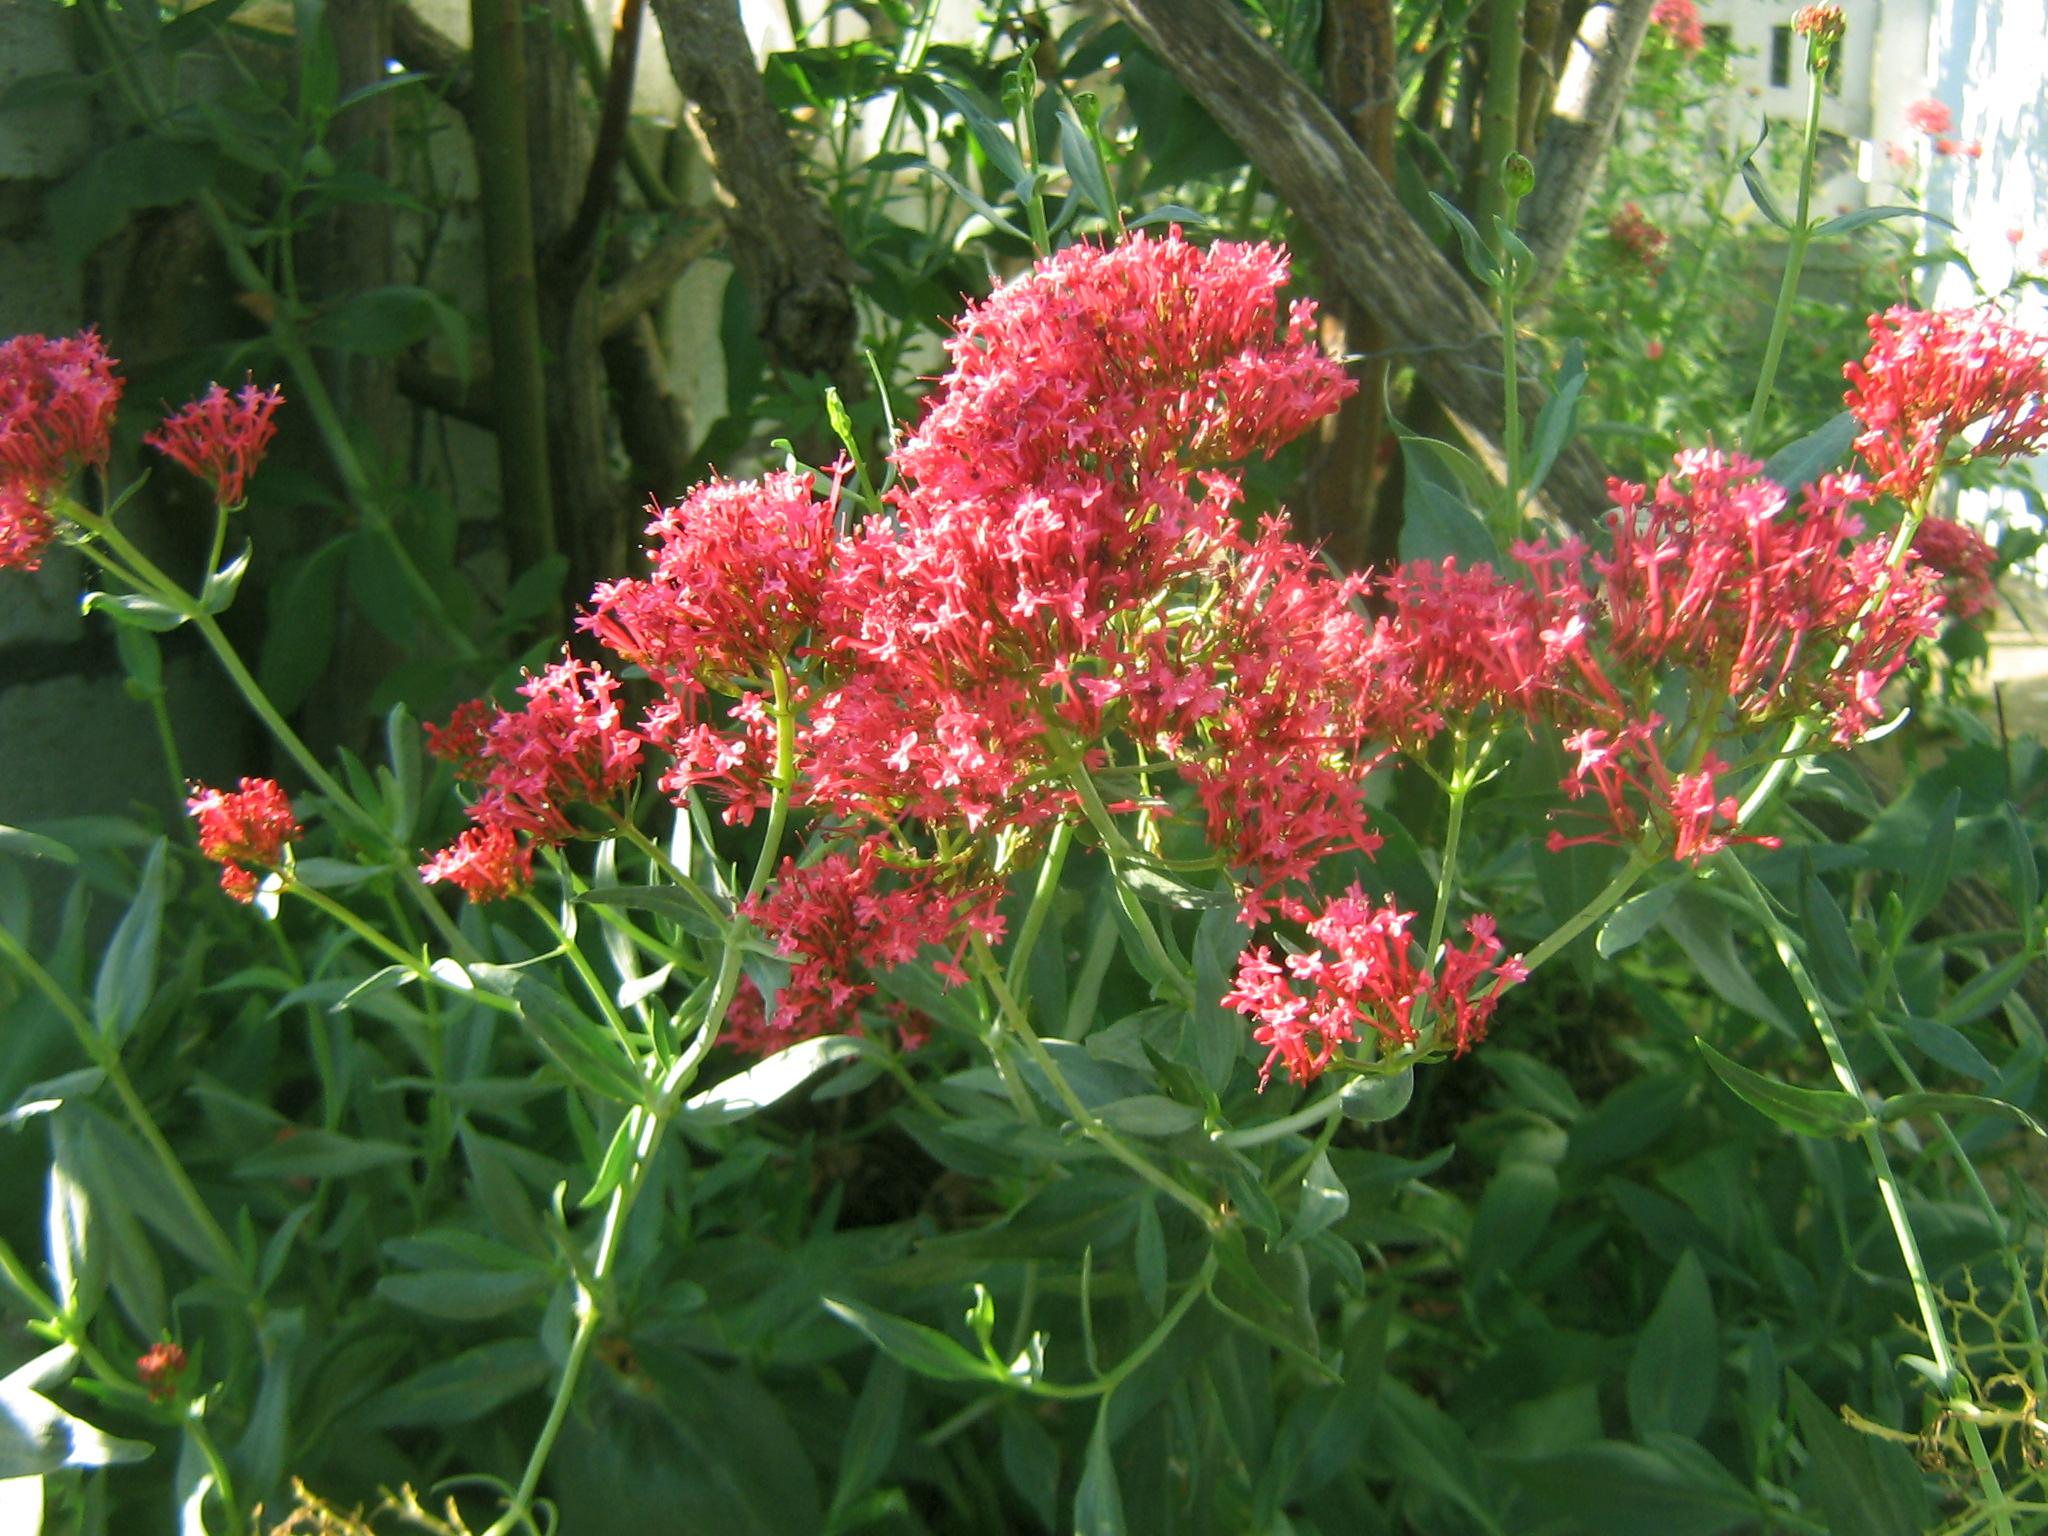 light-red flowers with green leaves and light-green stems